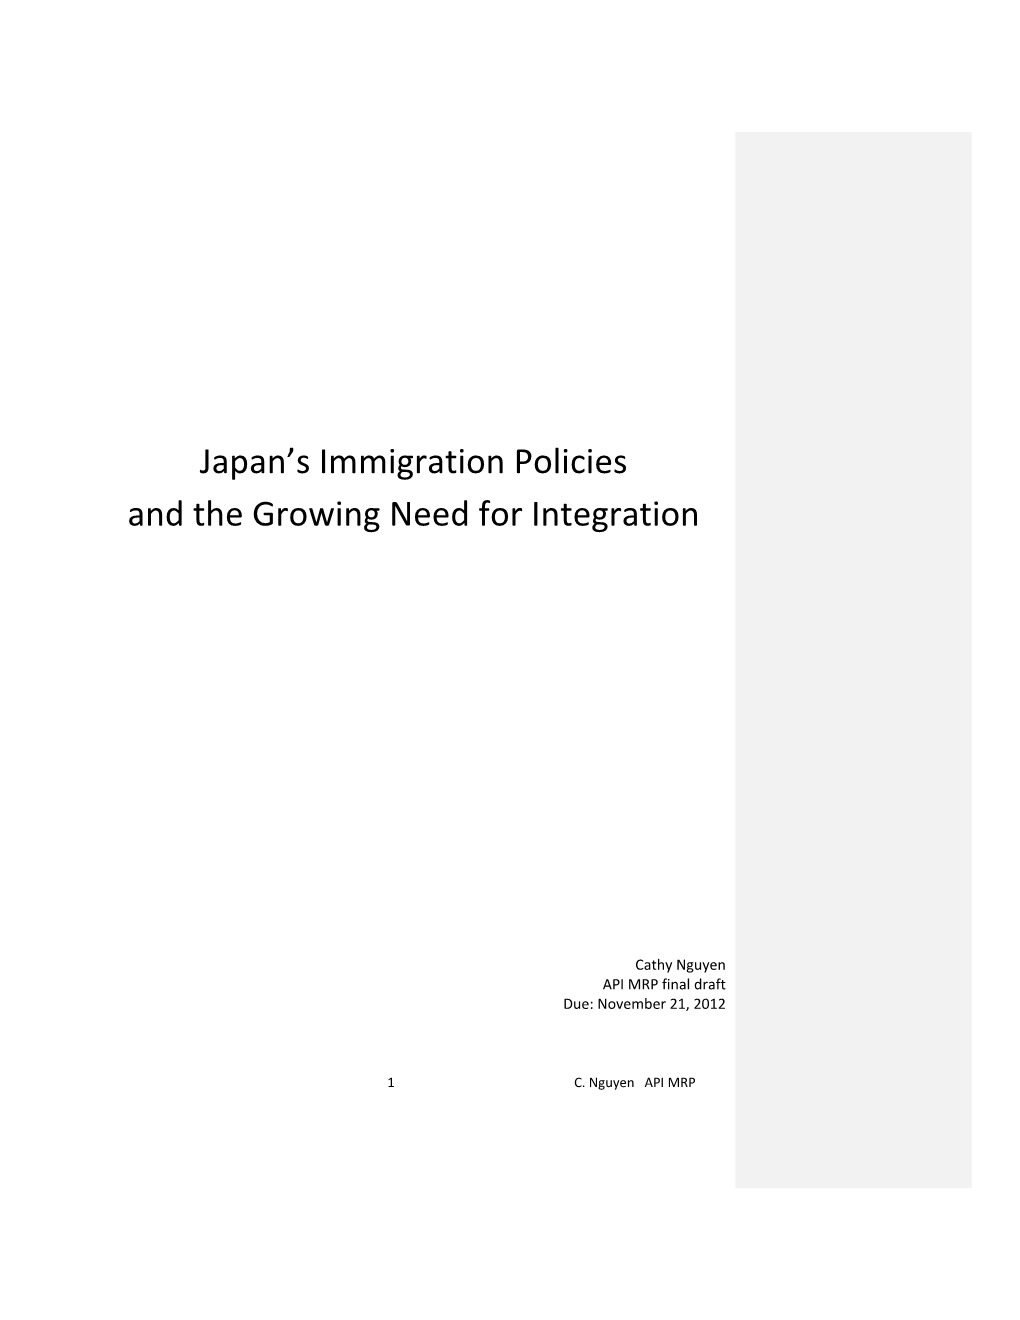 Japan's Immigration Policies and the Growing Need for Integration